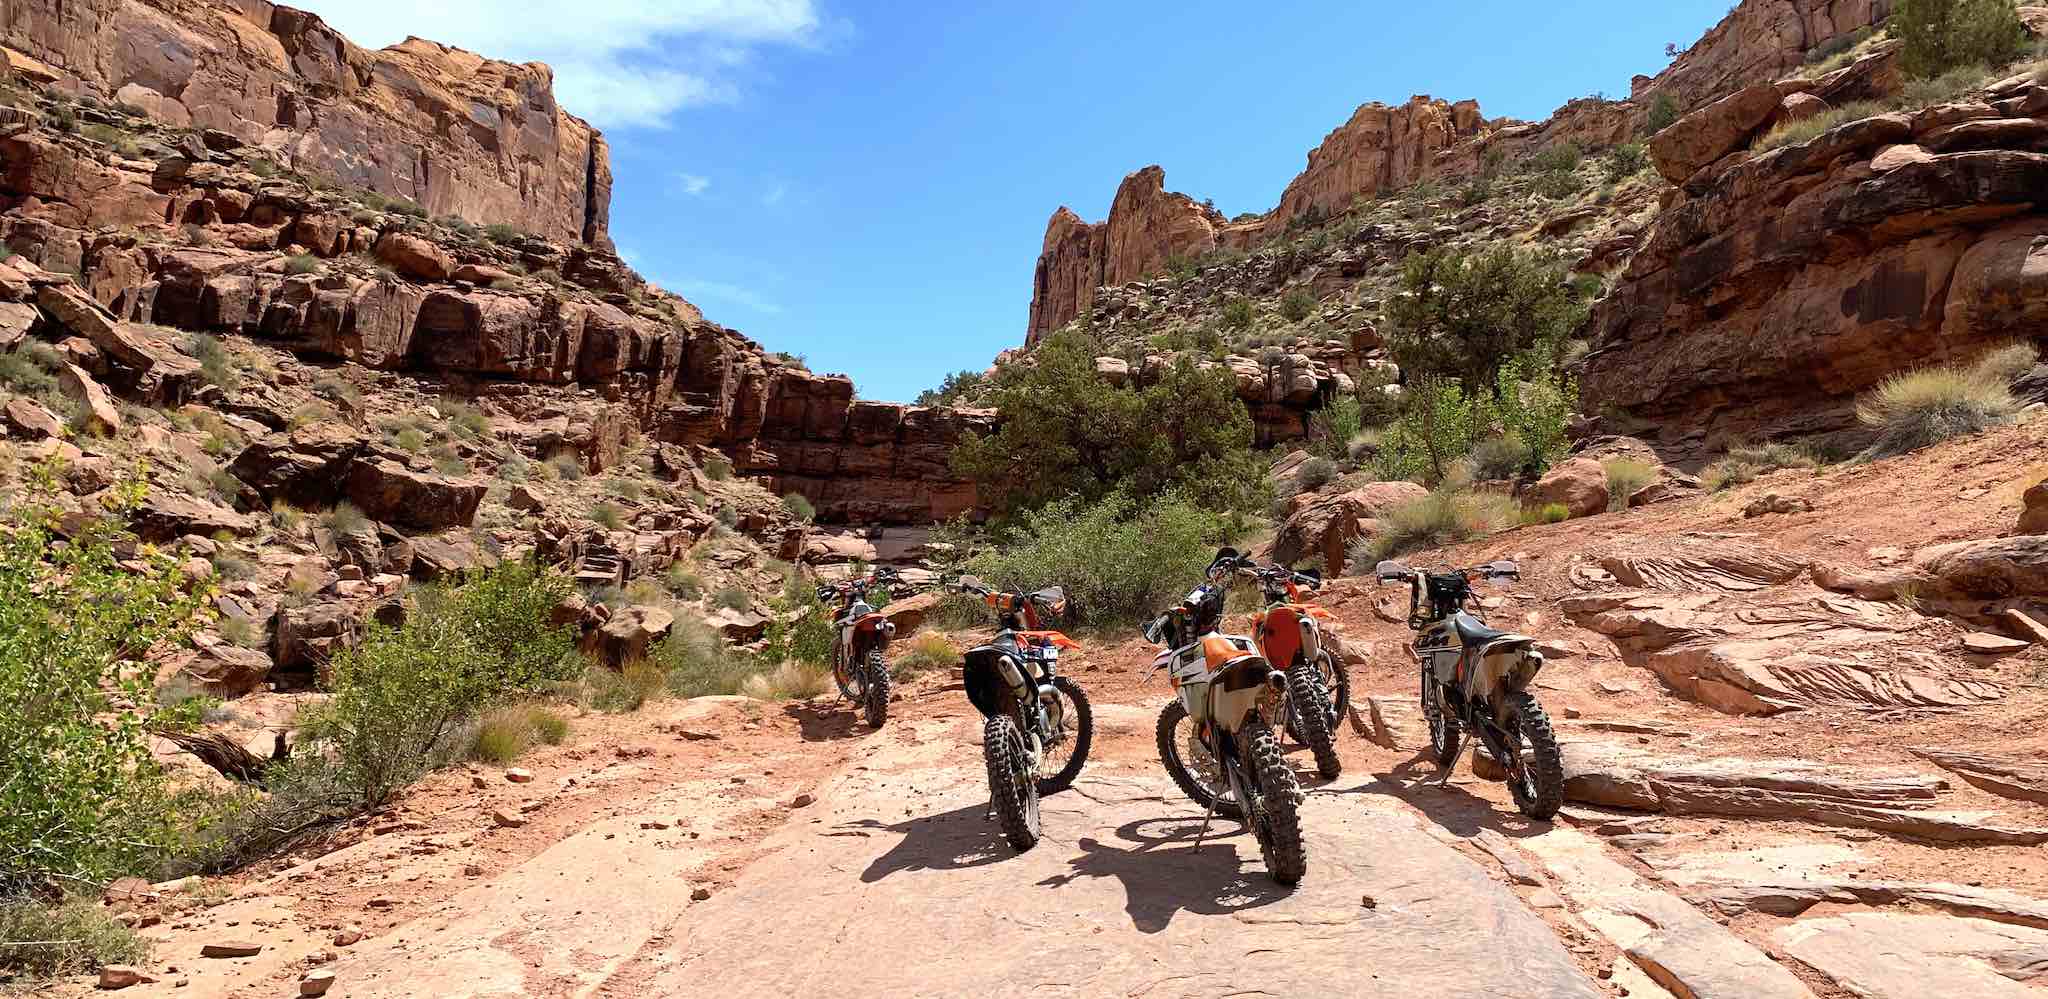 Five dirt bikes surrounded by rocky cliffs in Utah